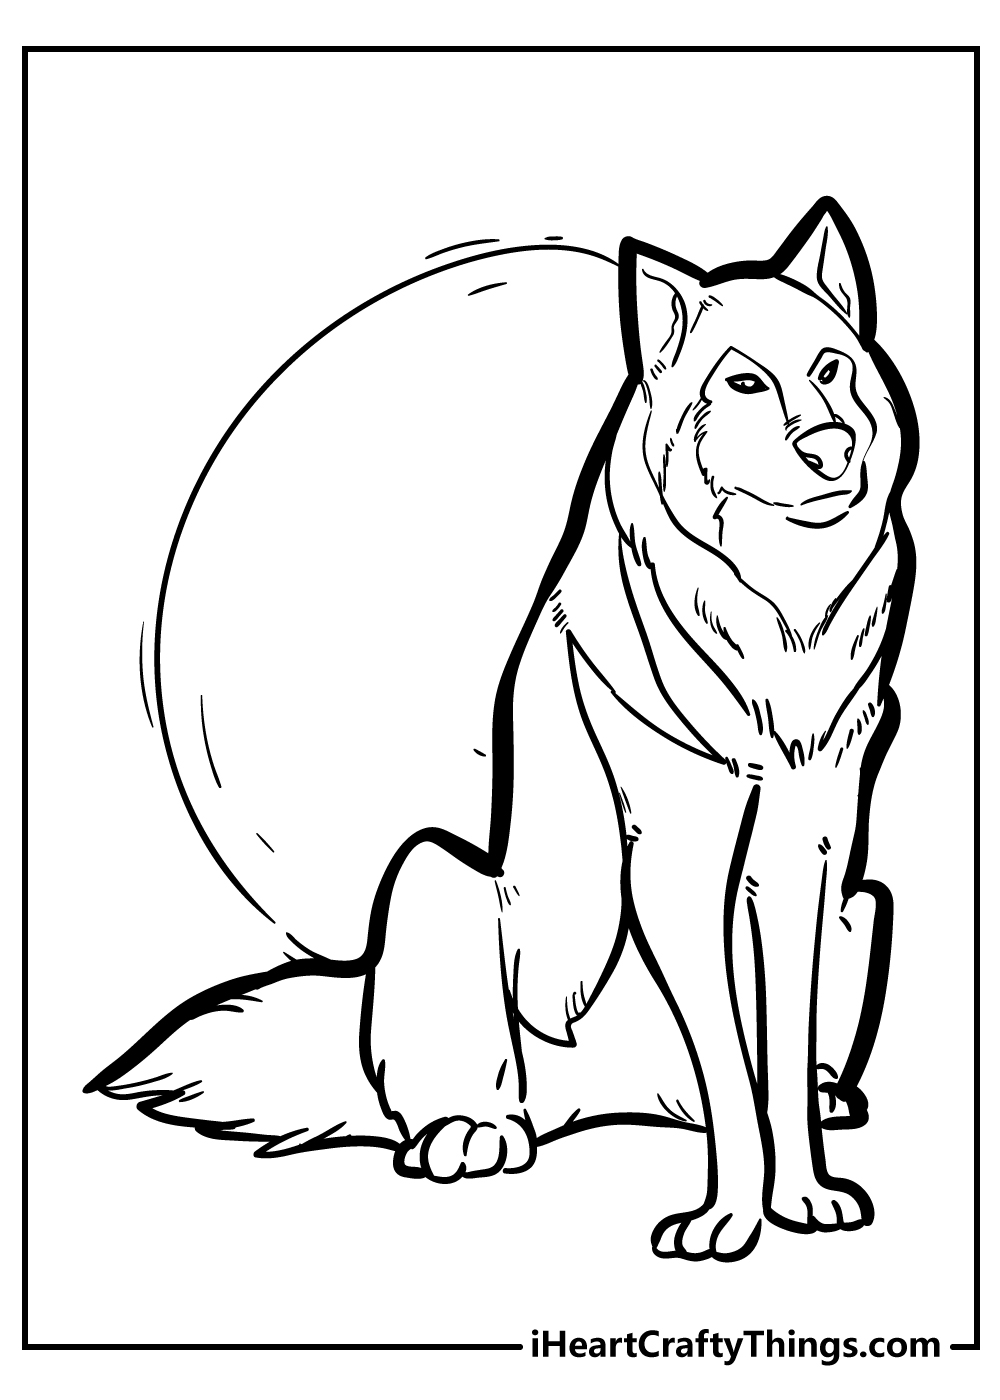 Wolf coloring pages for adults free printable